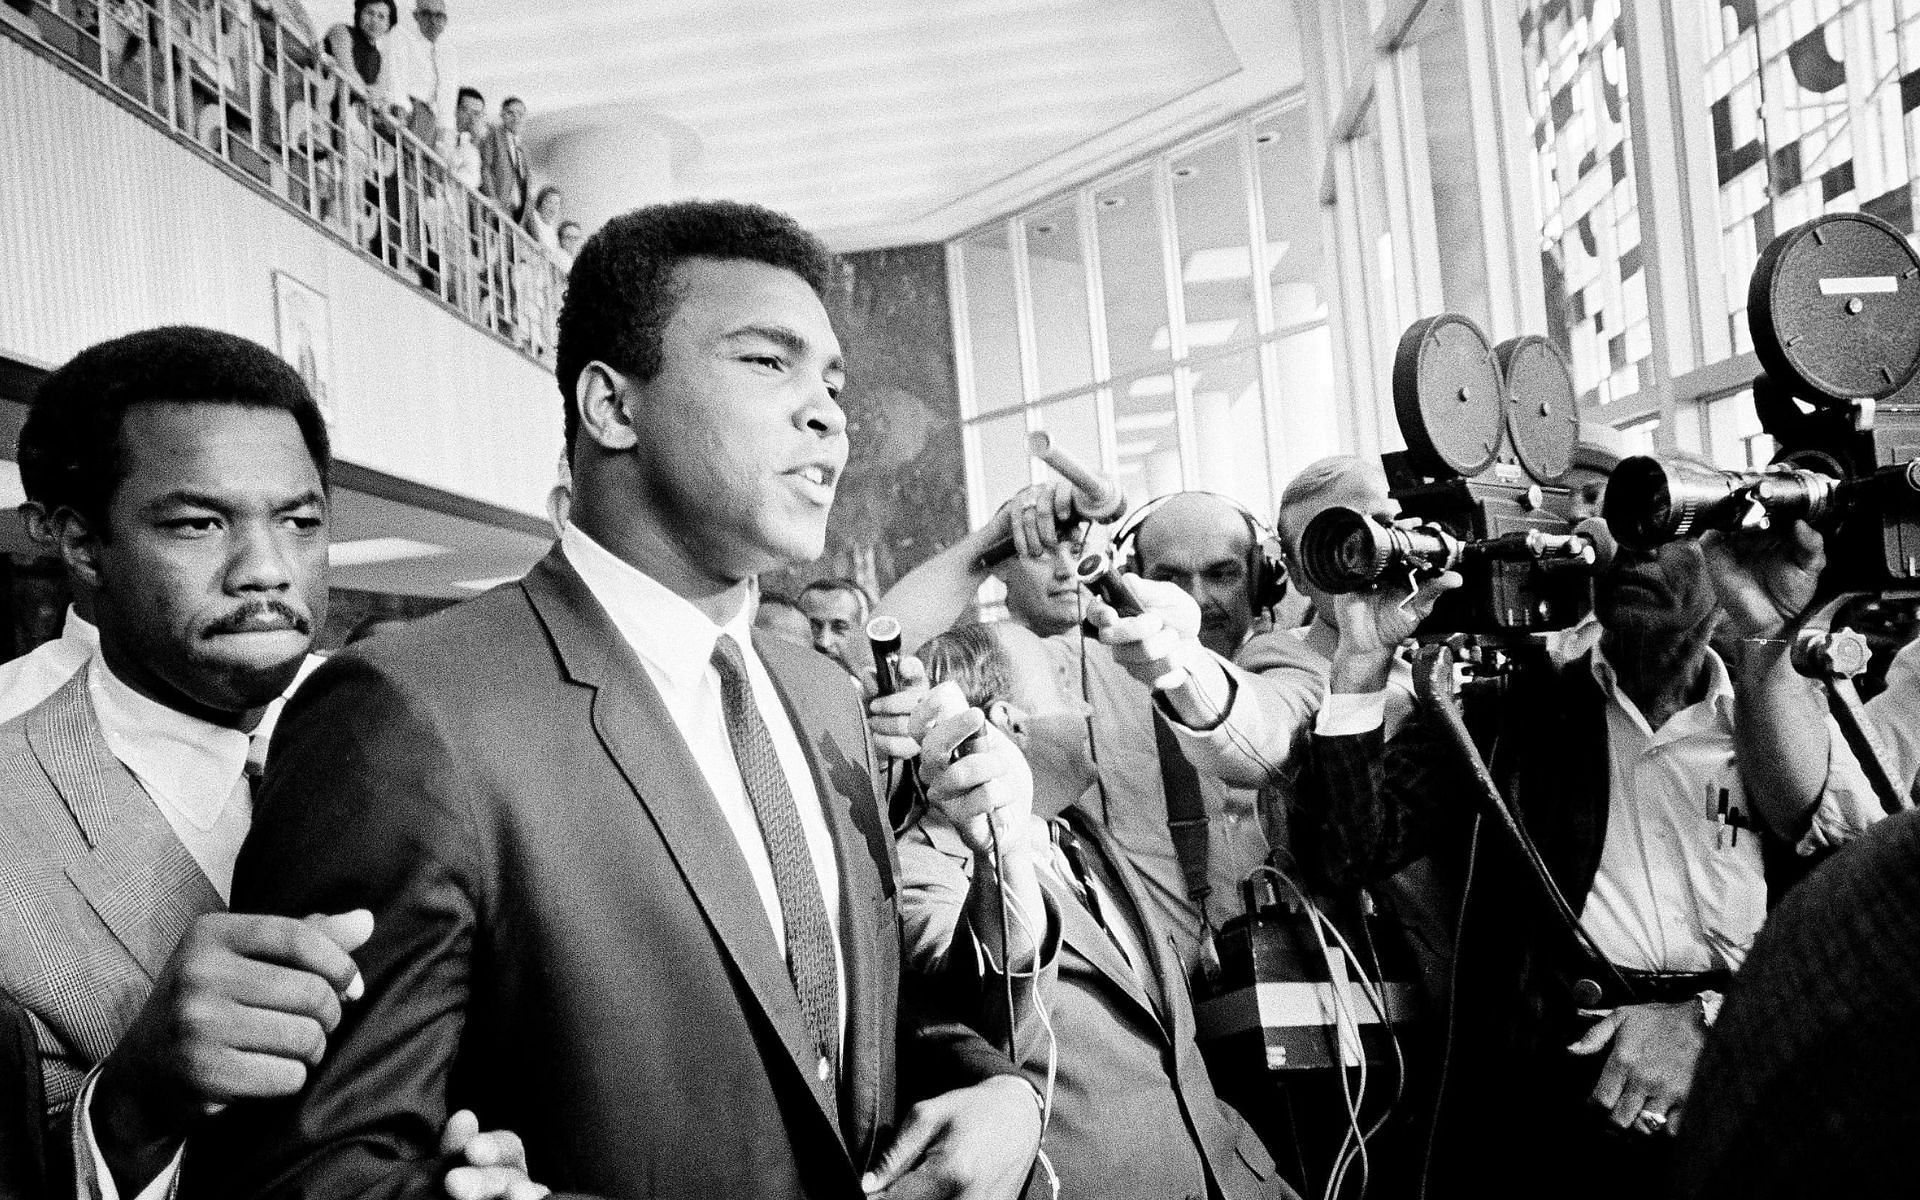 Muhammad Ali faces the media after being convicted of evading the draft